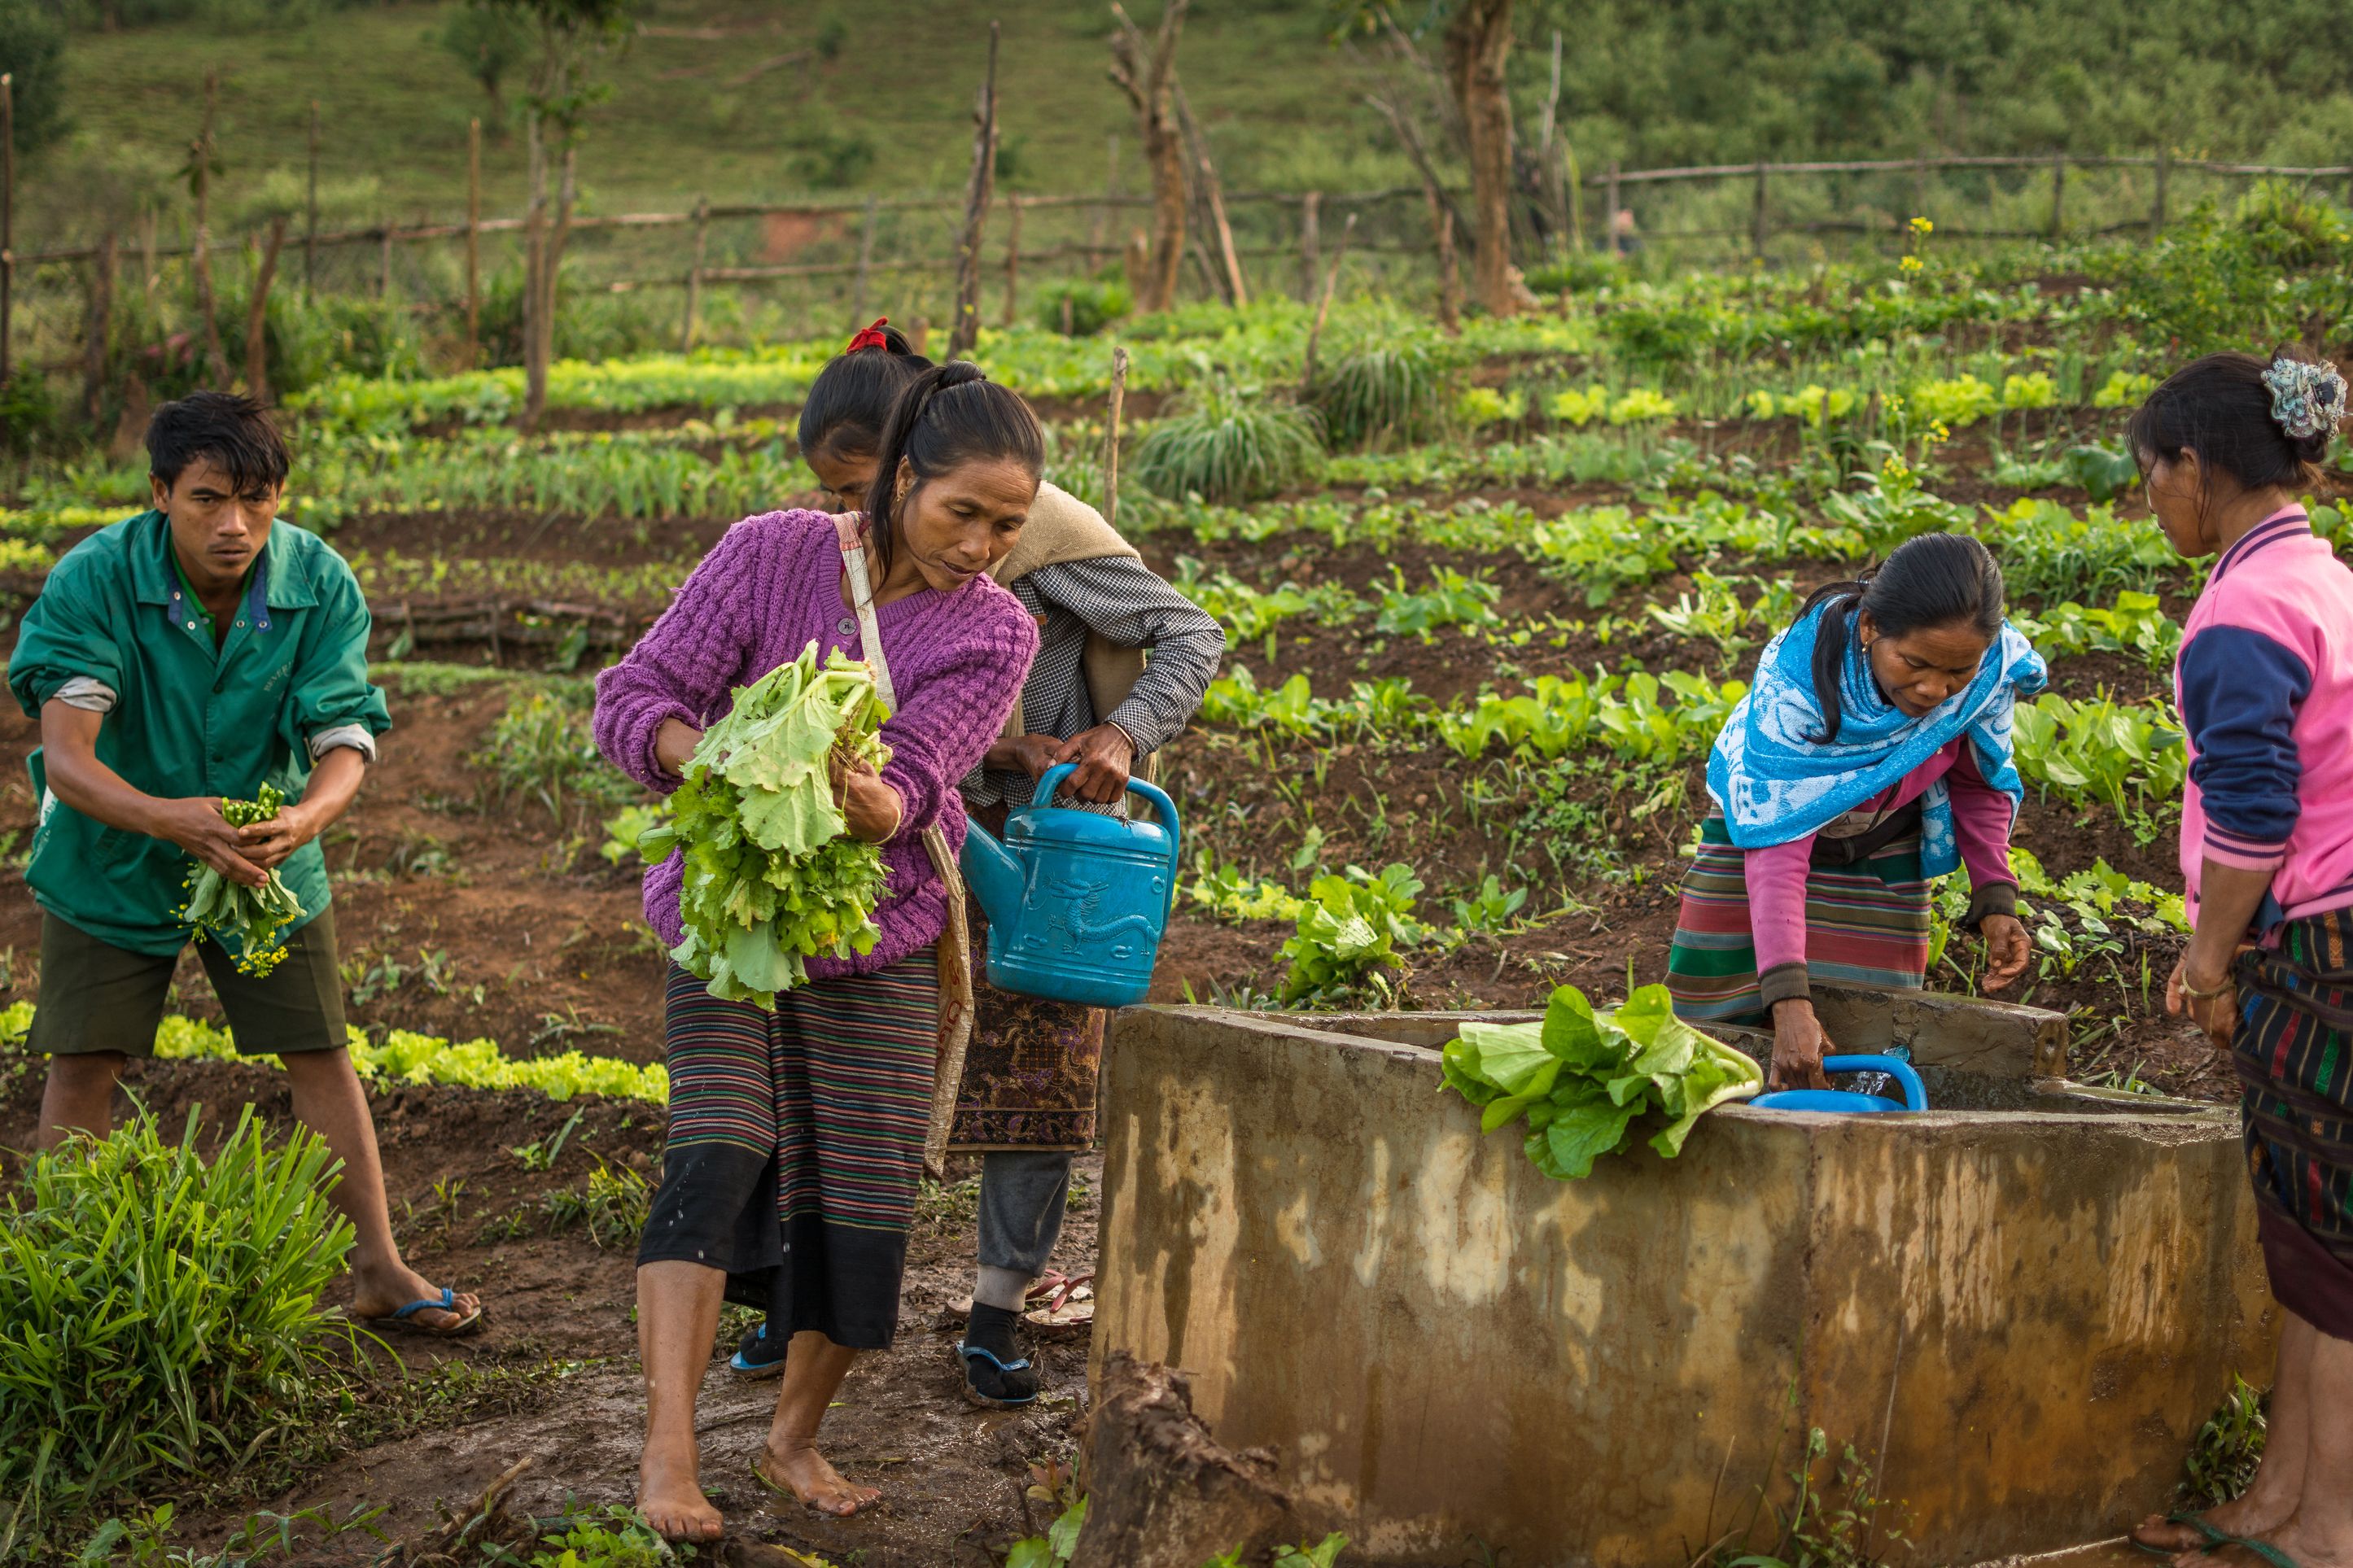 Water Supply in Upland areas for Vegetables Cultivation - Luang Prabang  © Gaylord Giordanino